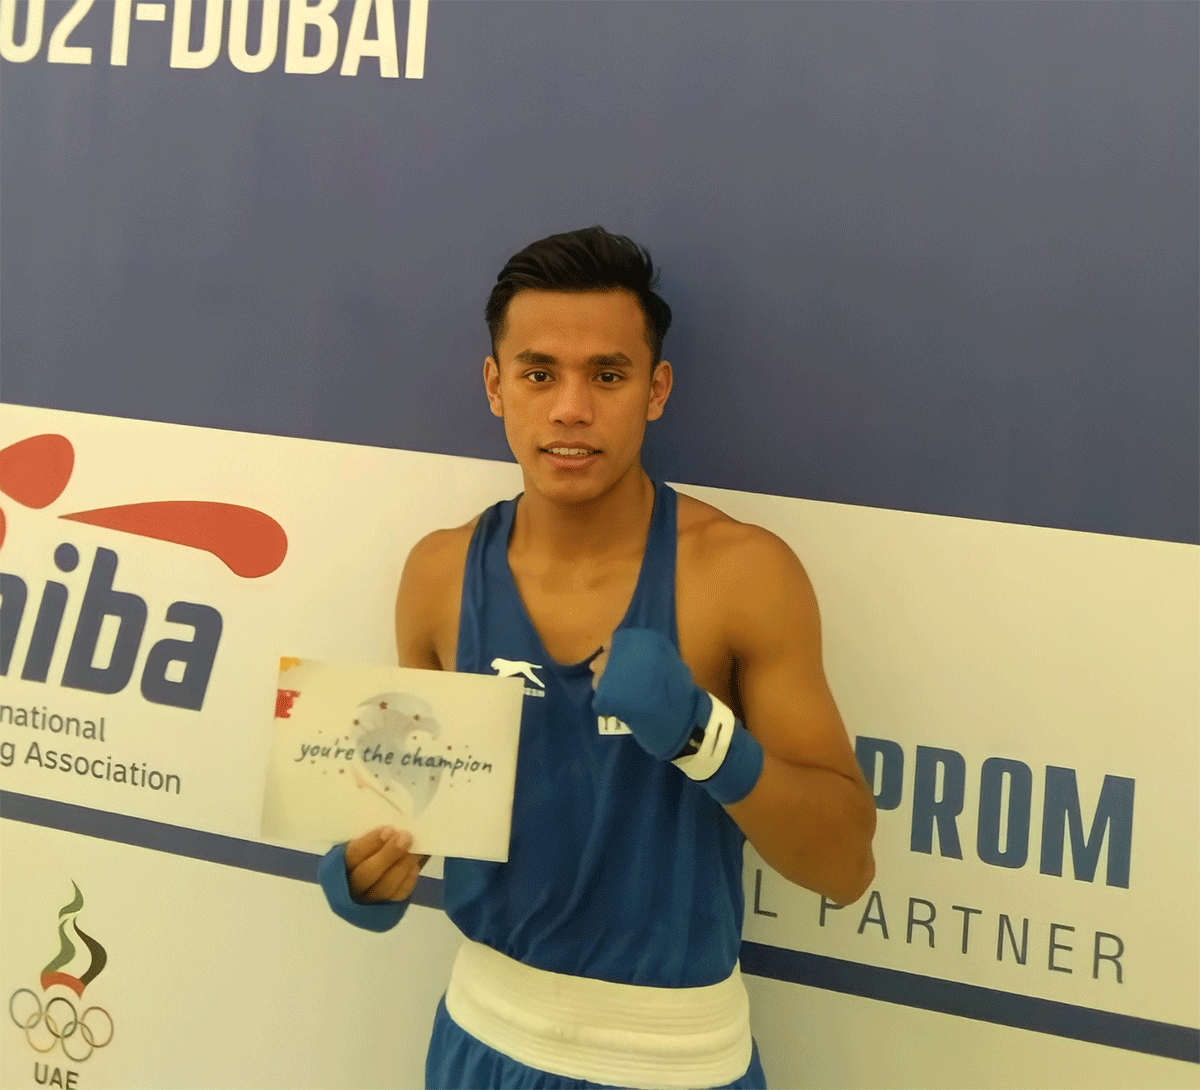 Bishwamitra Chongtham bagged a gold medal in the 51kg category at the Asian Youth Boxing Championships in Dubai on Monday